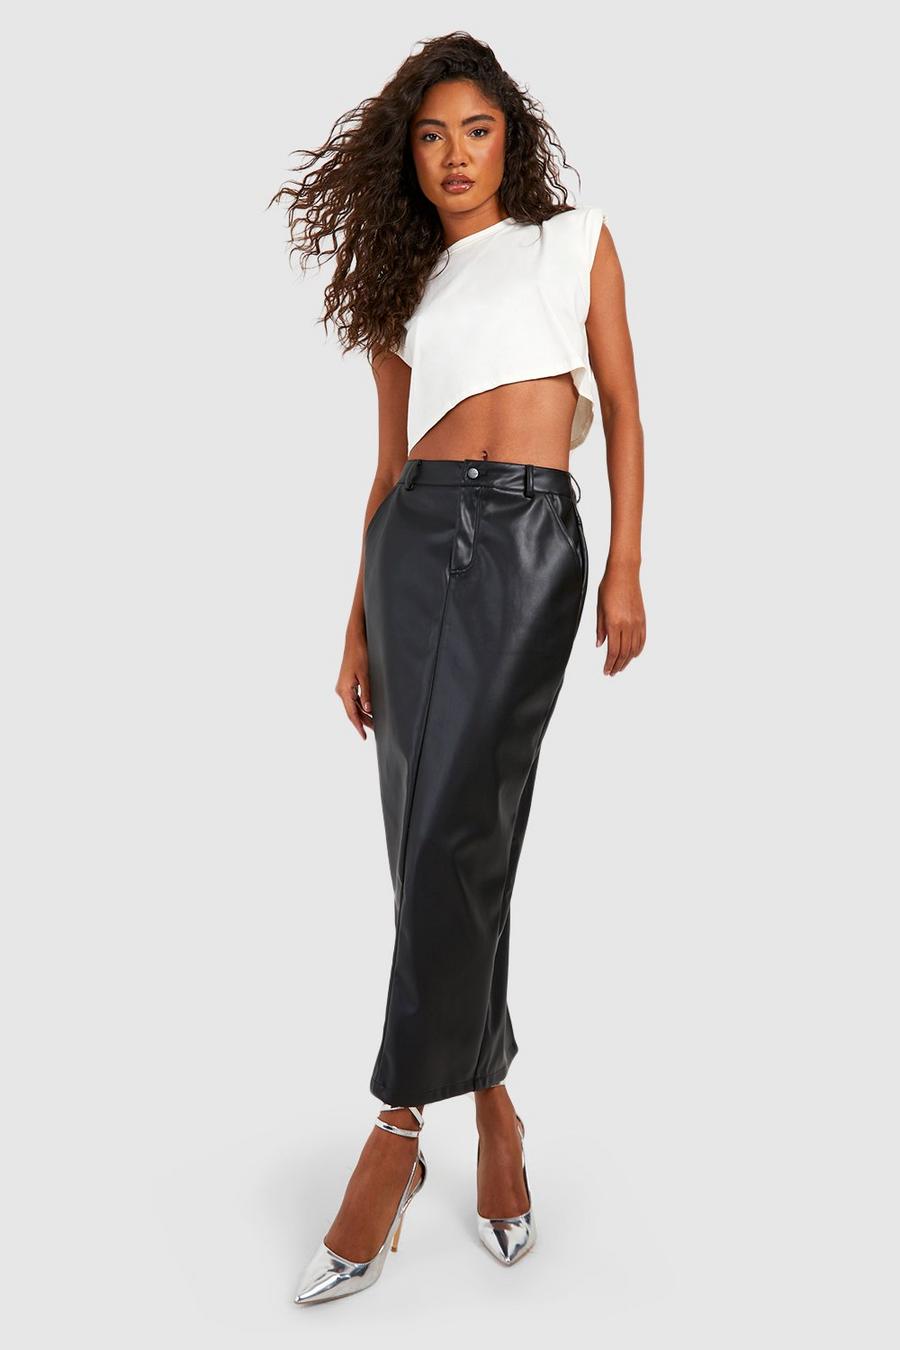 Black Tall Faux Leather High Waisted Midi Skirt image number 1